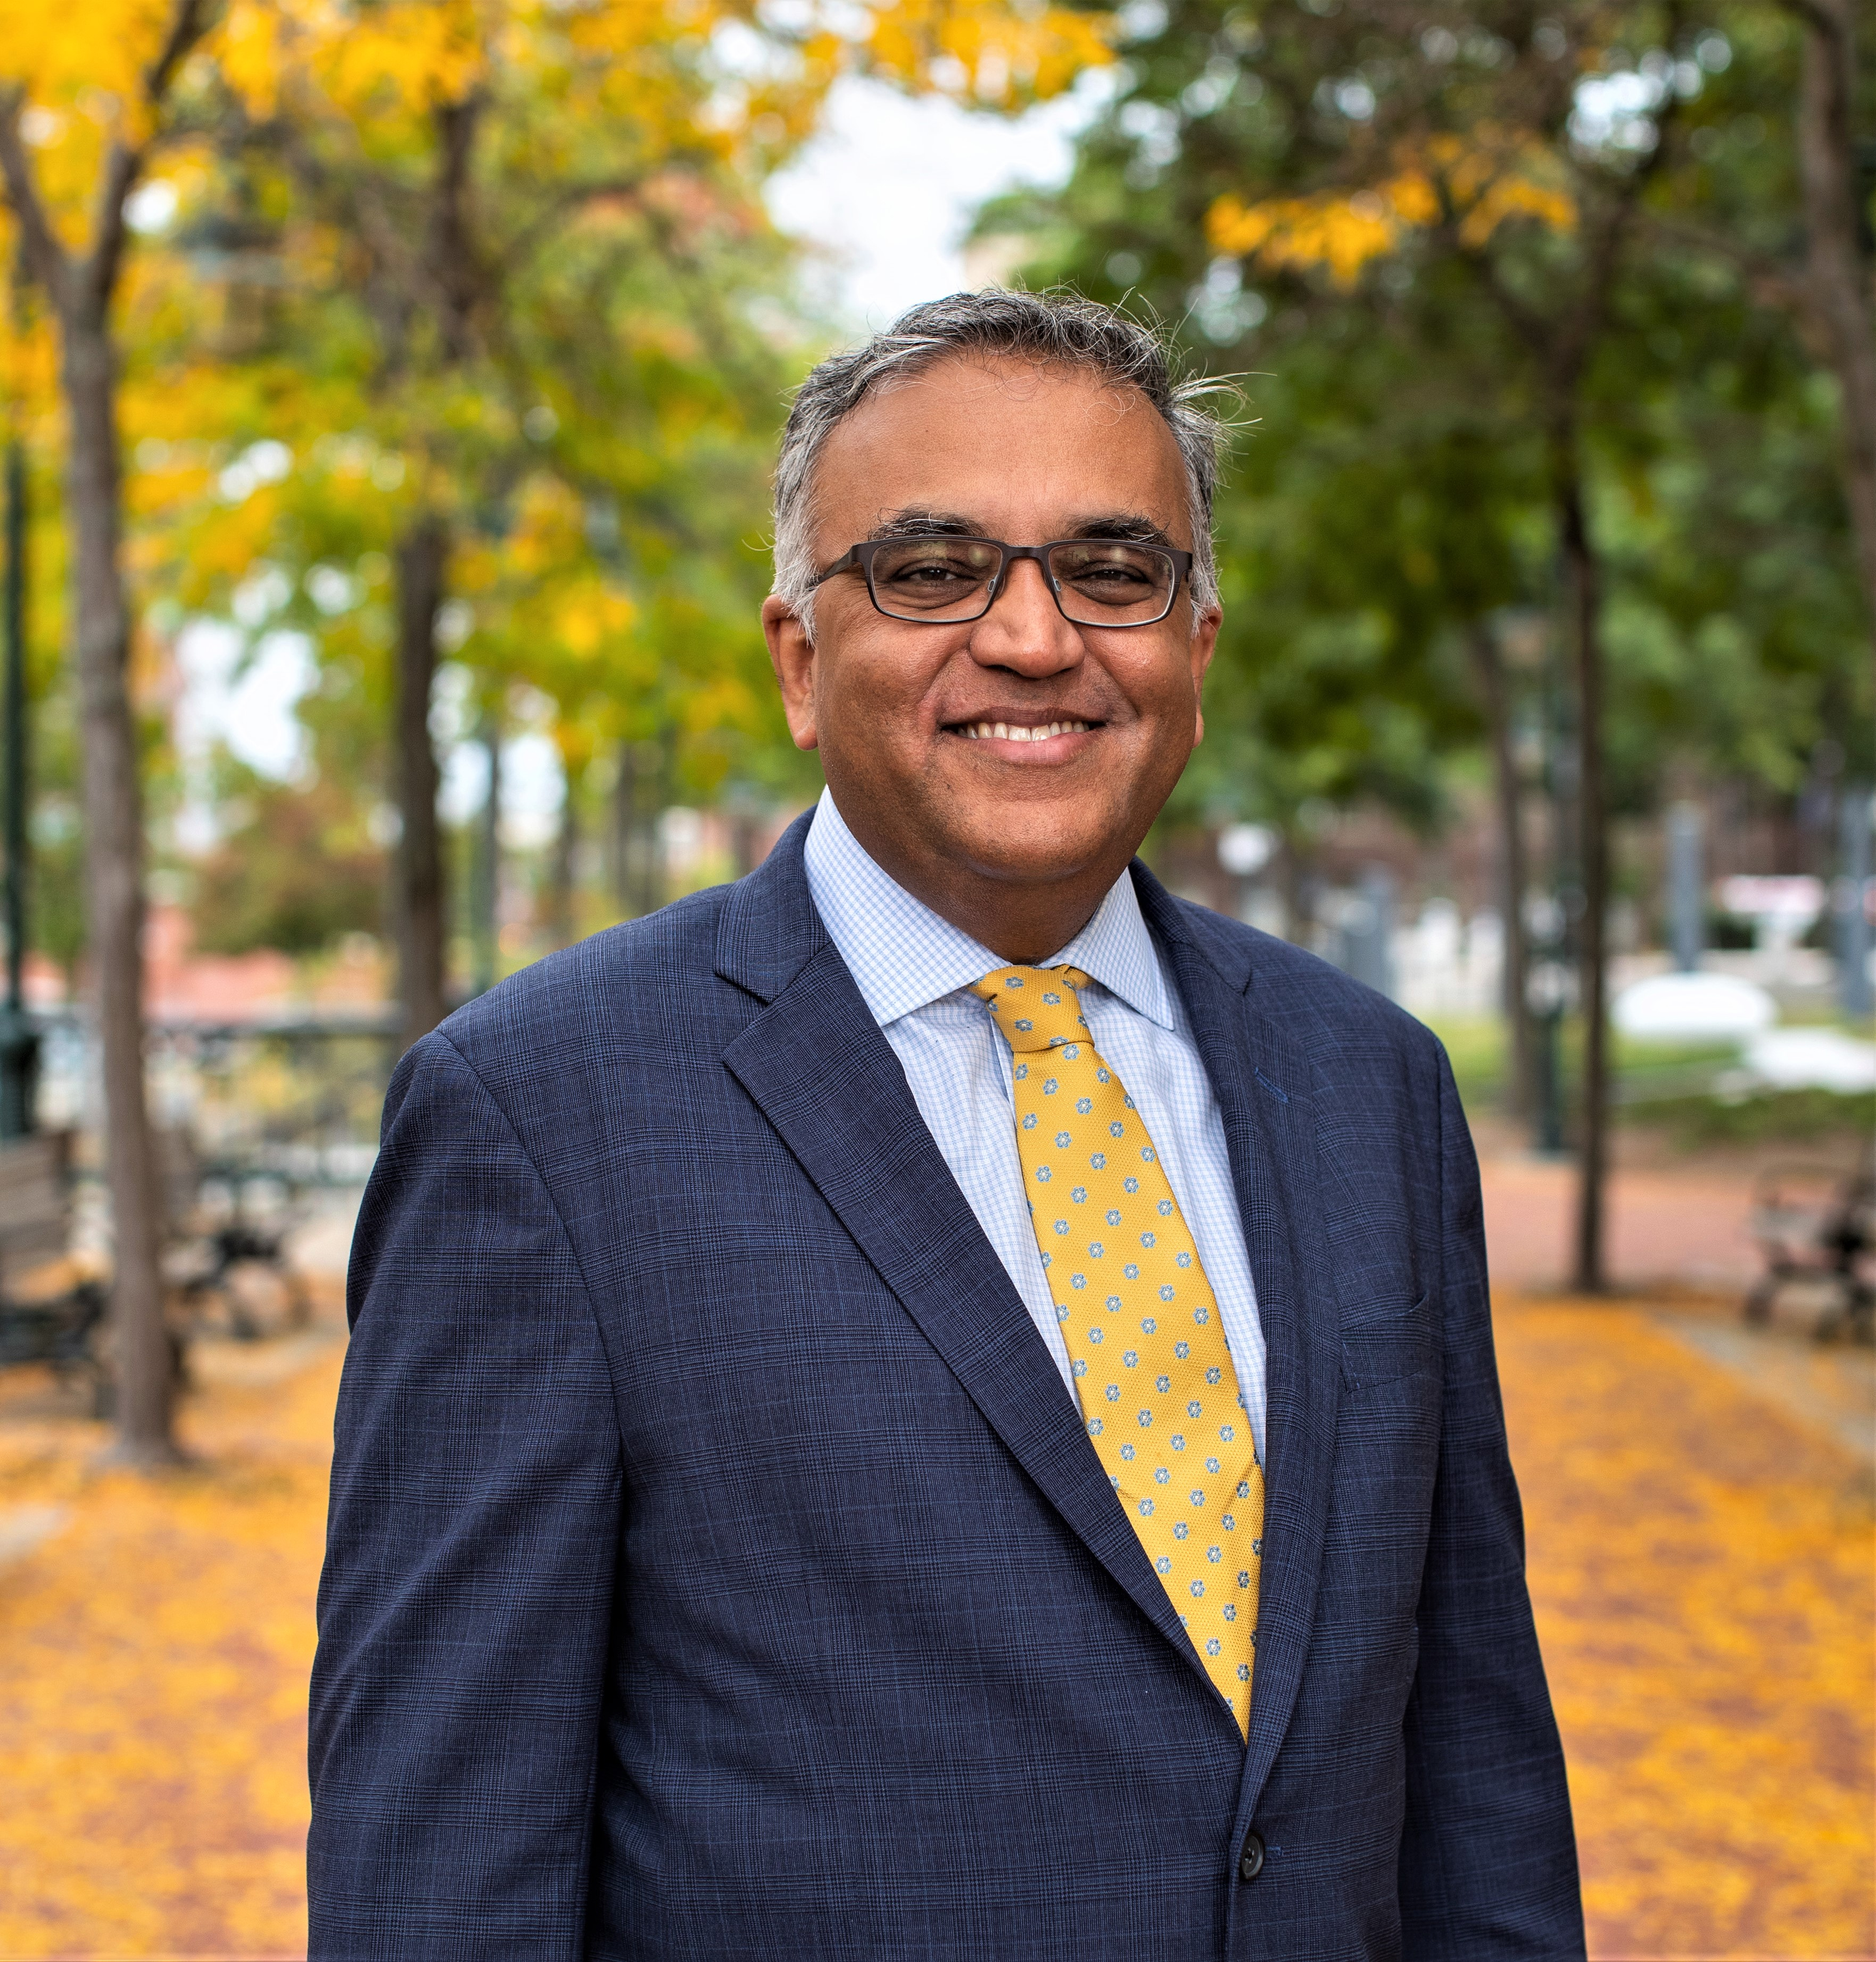 Welcome to Episode 26 of “COVID: What comes next,” an exclusive weekly Providence Journal/USA TODAY NETWORK podcast featuring Dr. Ashish Jha, dean of the Brown University School of Public Health and an internationally respected expert on pandemic response and preparedness.